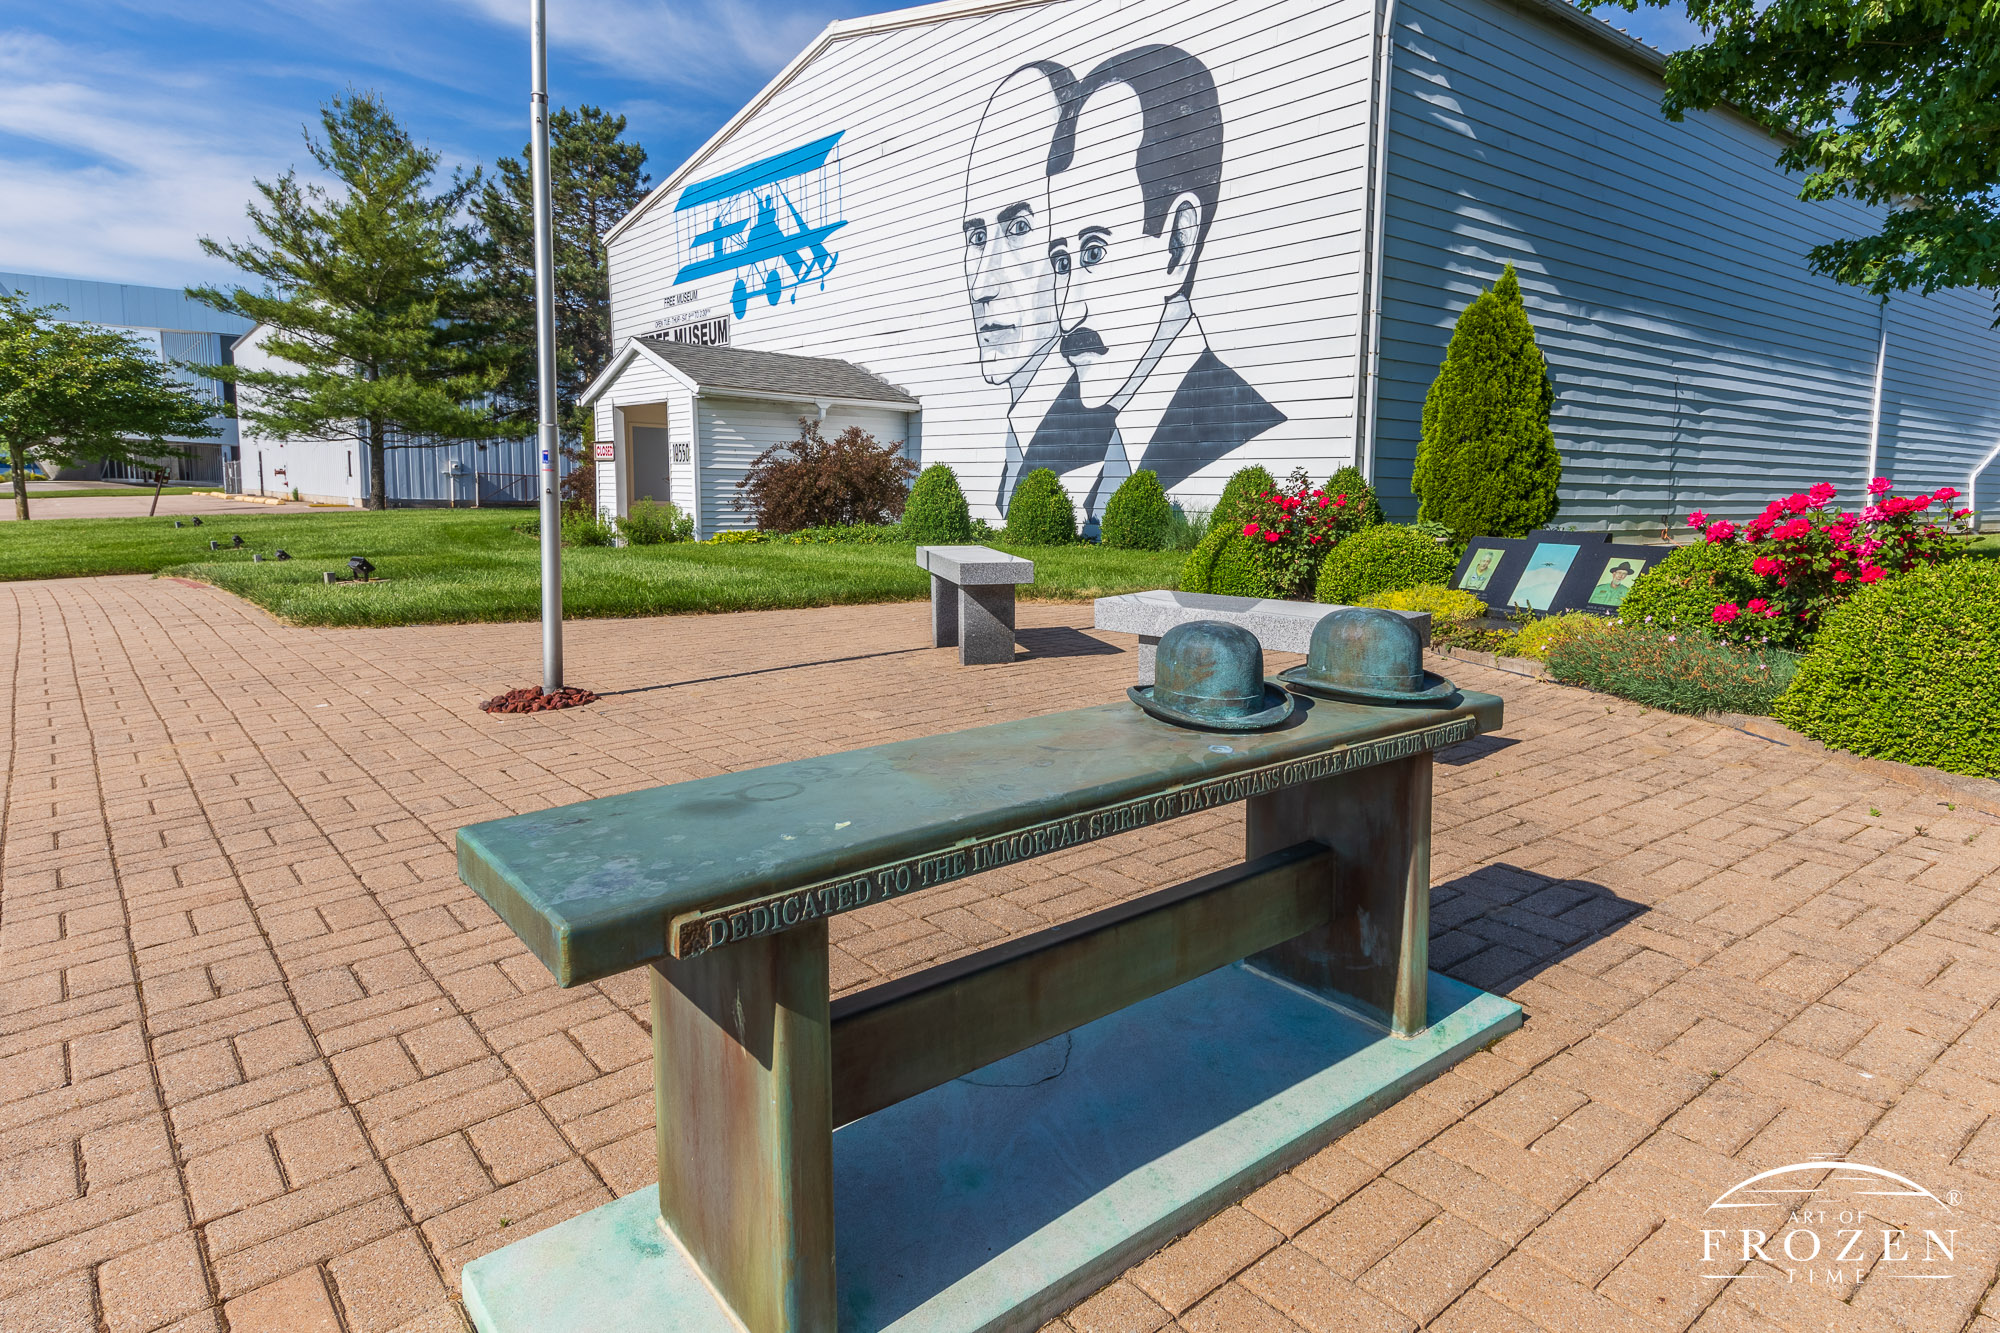 Mural of the Wright Brothers and their Wright B Flyer on a June evening while a bronze bench scultpure featuring their classic derby hats sits in the foreground